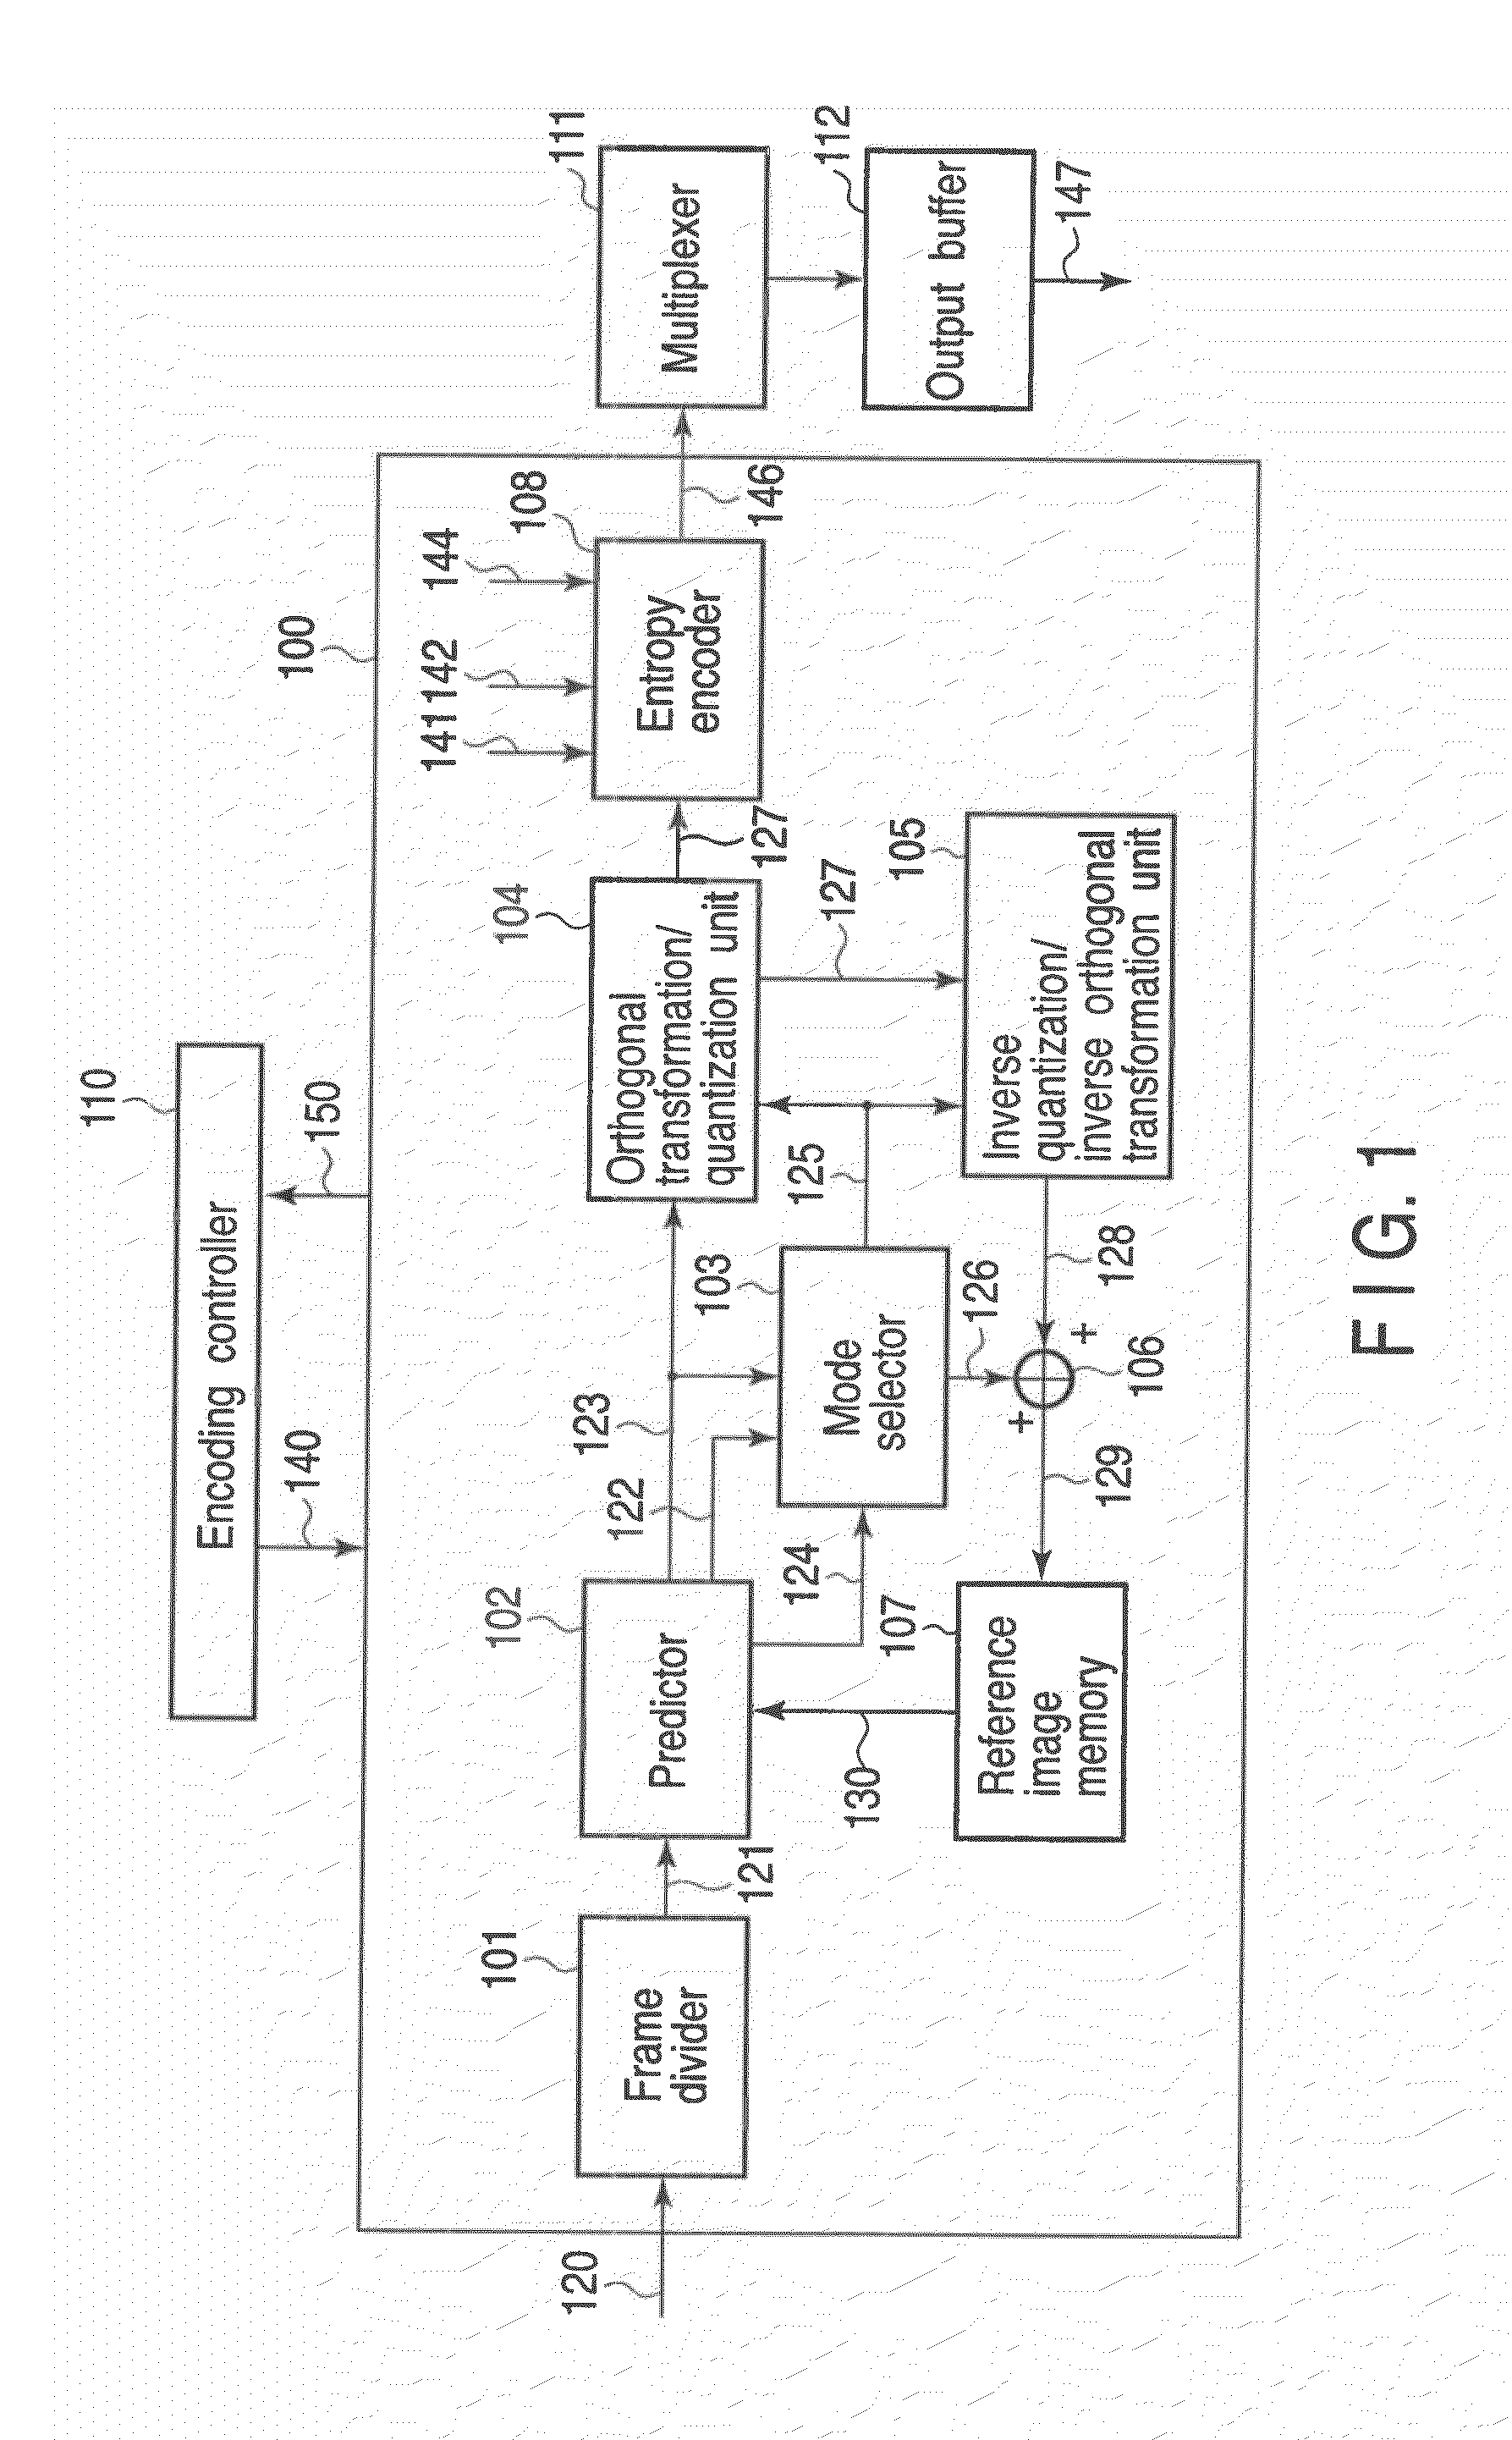 Method and apparatus for encoding and decoding image